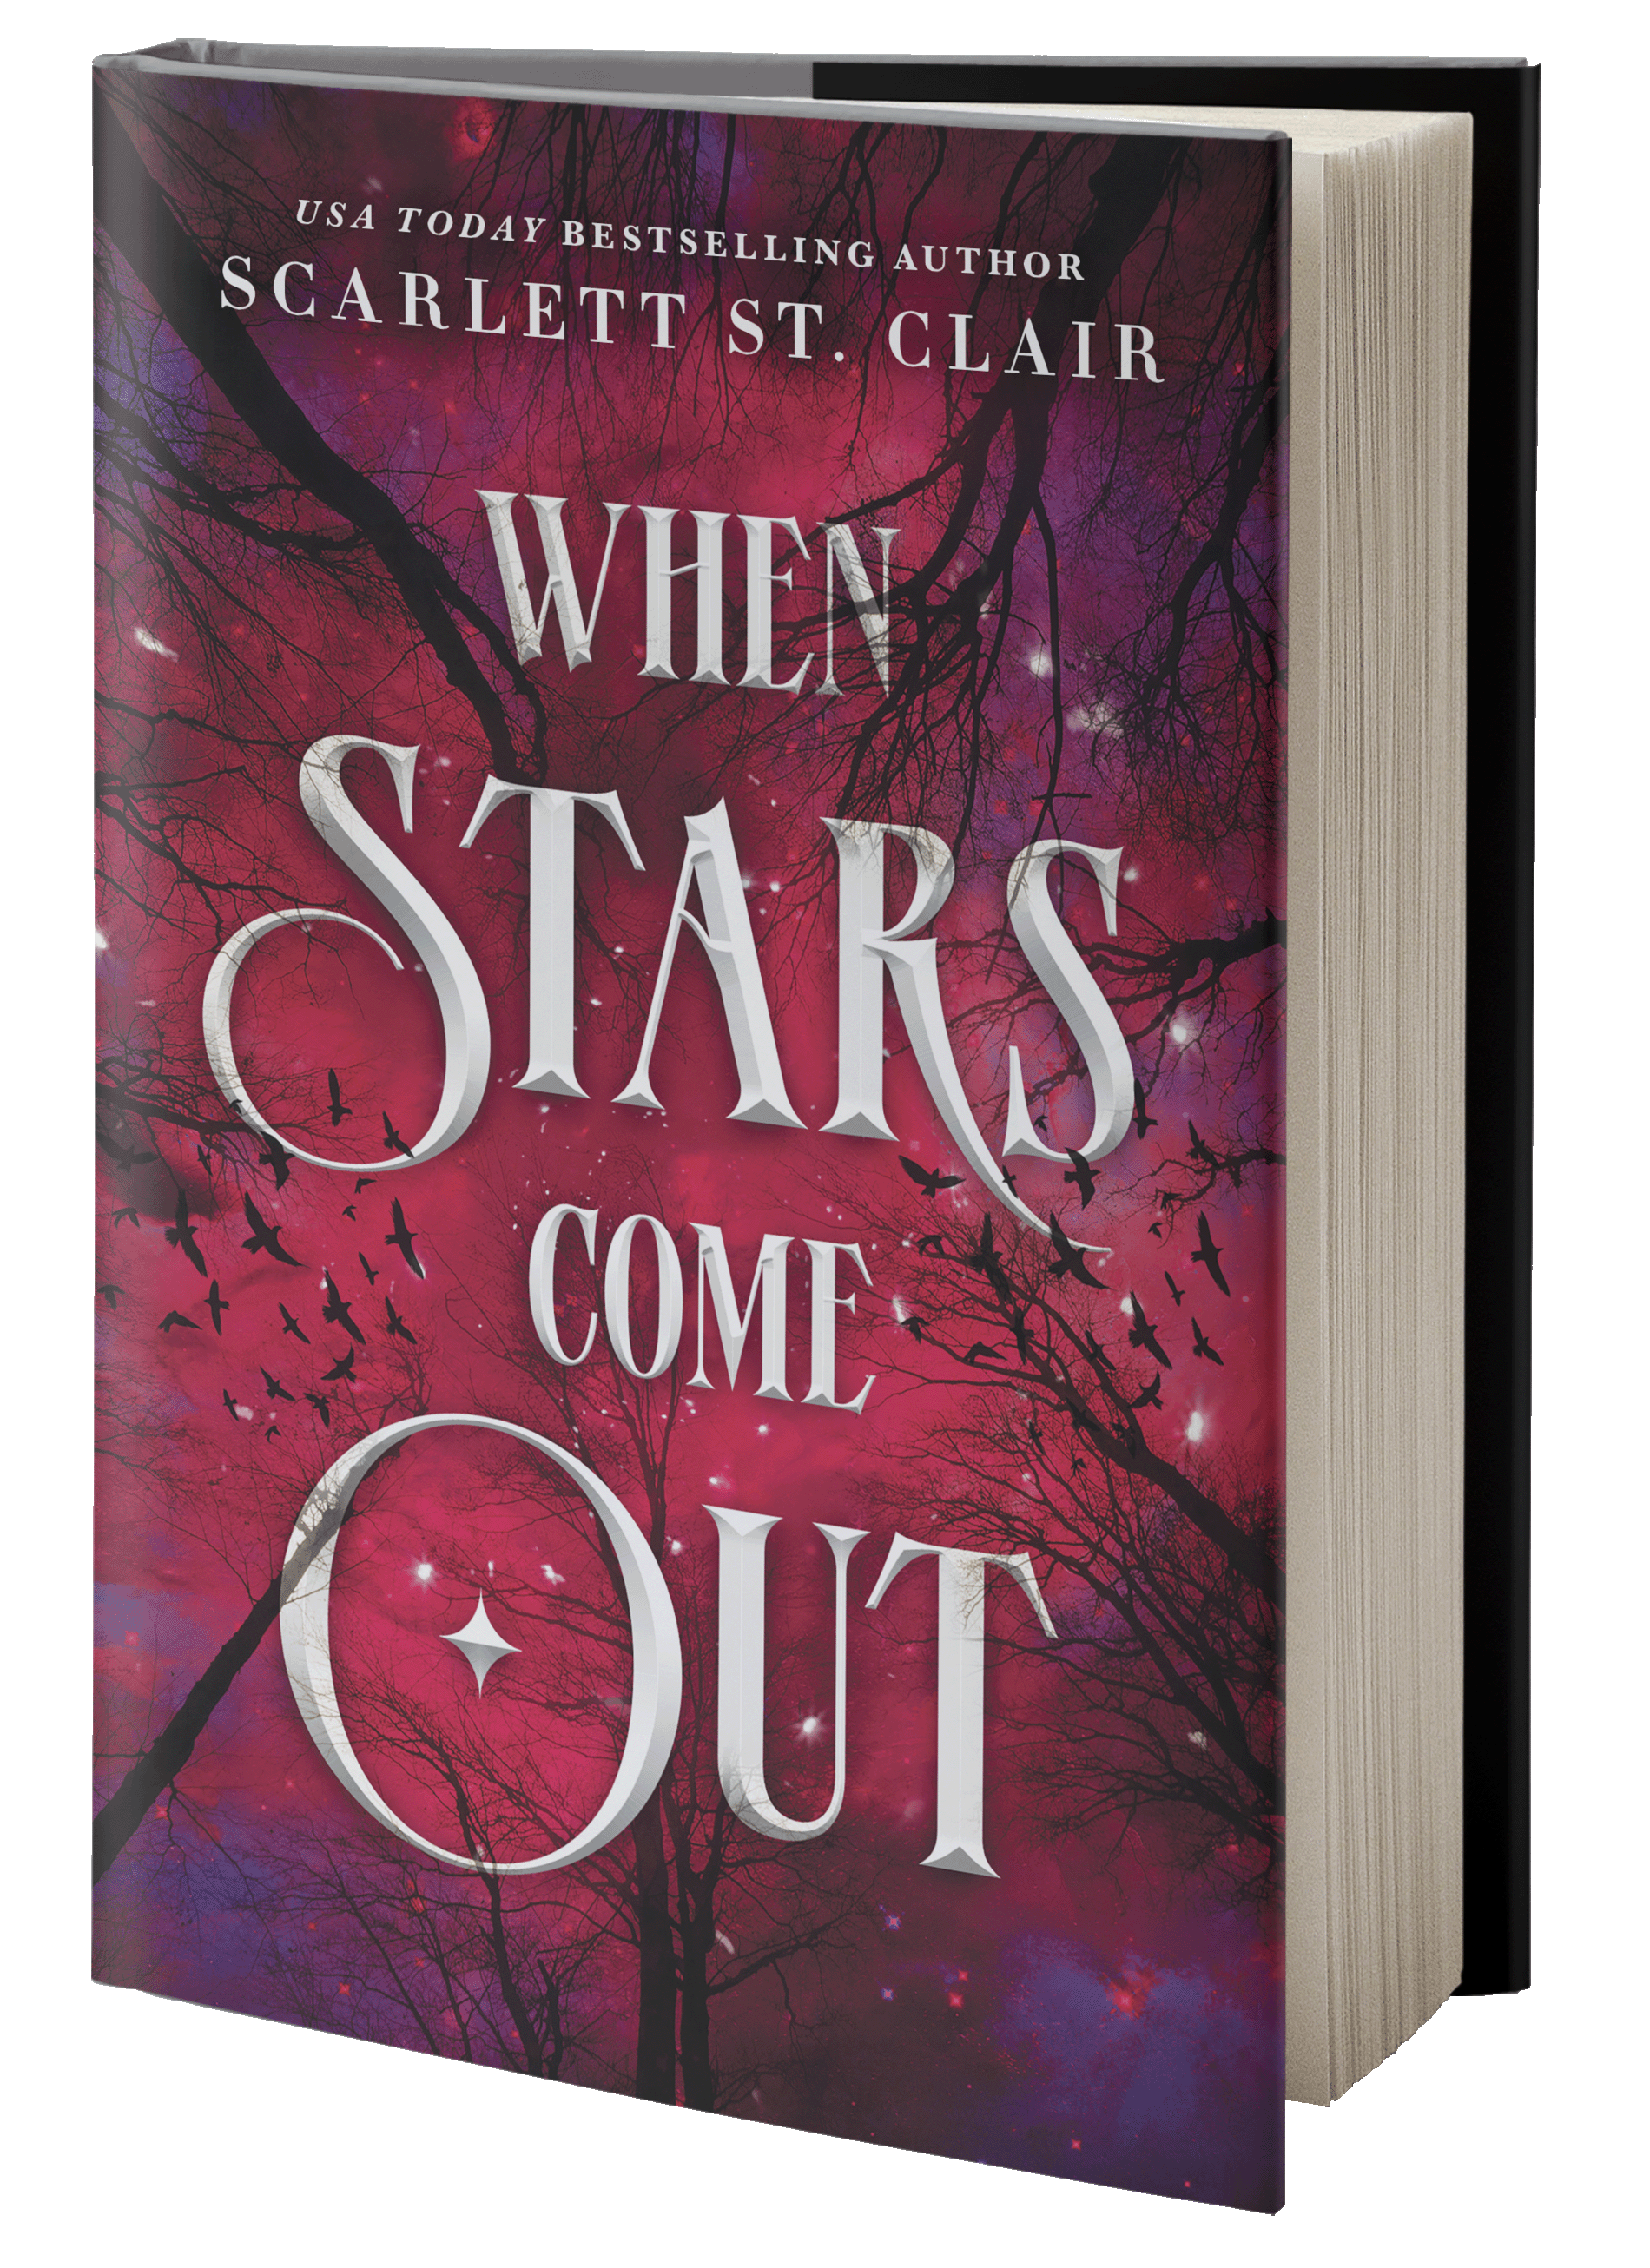 Book cover of "When Stars Come Out"